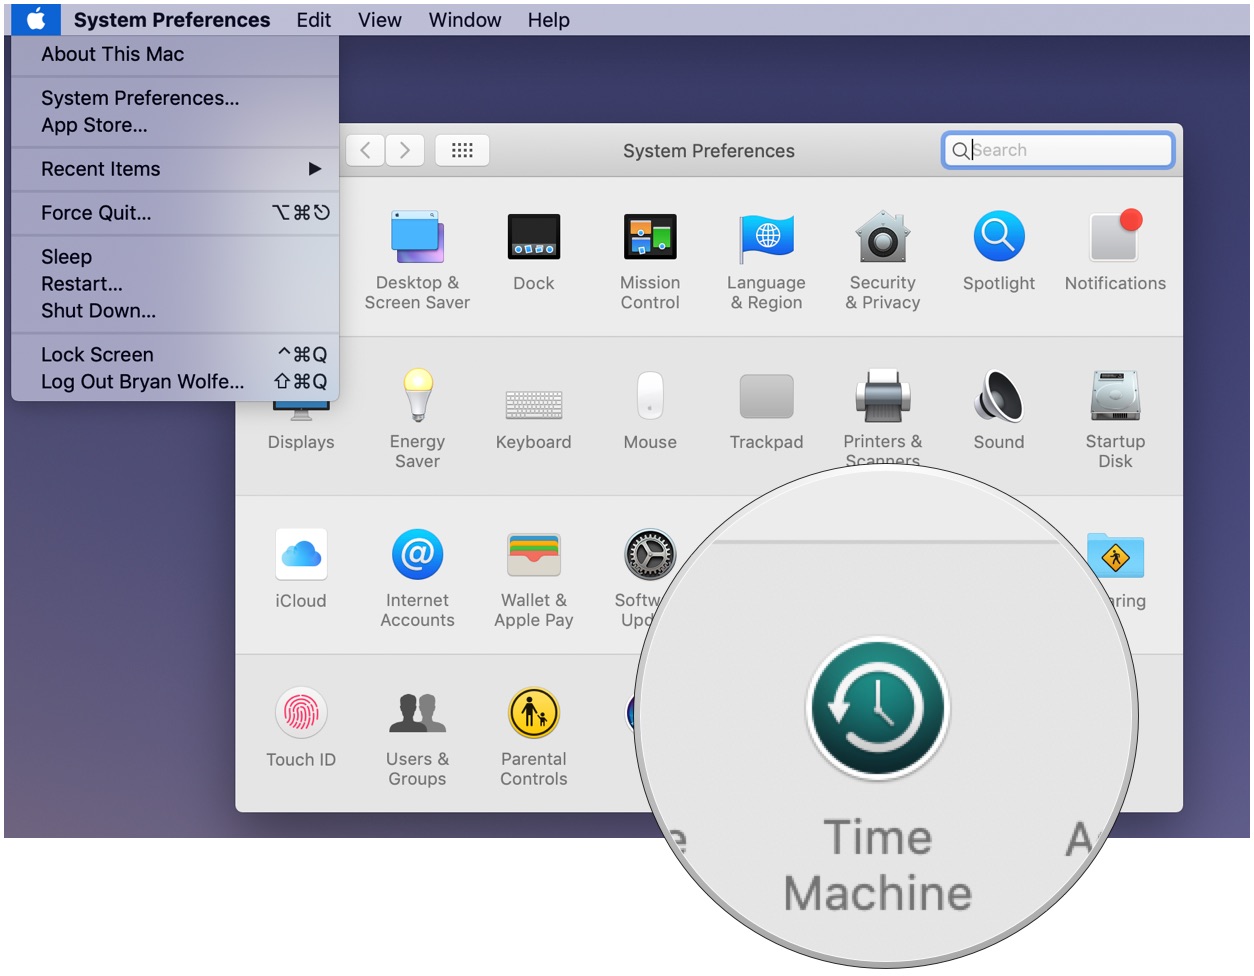 To restore files from a Time Machine backup, select System Preferences from the Apple menu, then choose the Time Machine icon.